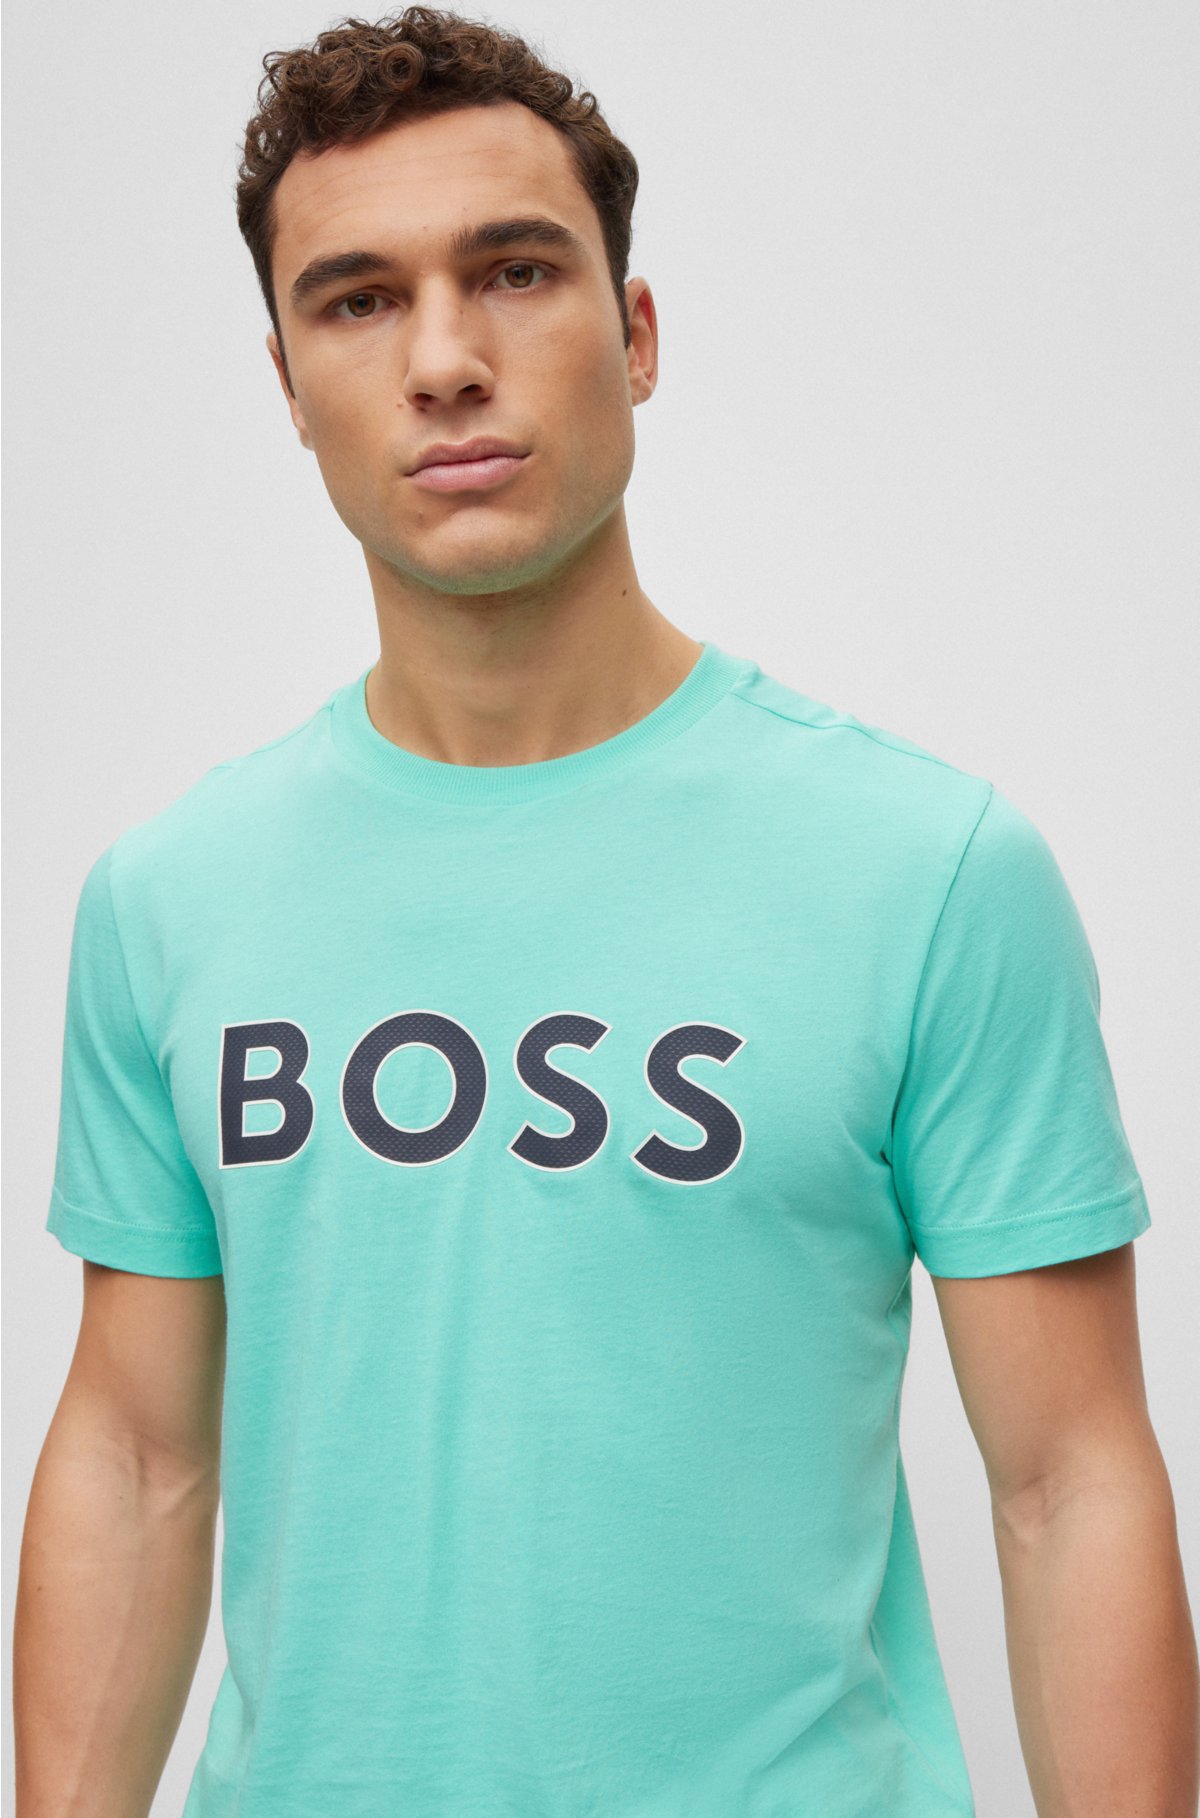 BOSS - Crew-neck T-shirt logo in with jersey print cotton